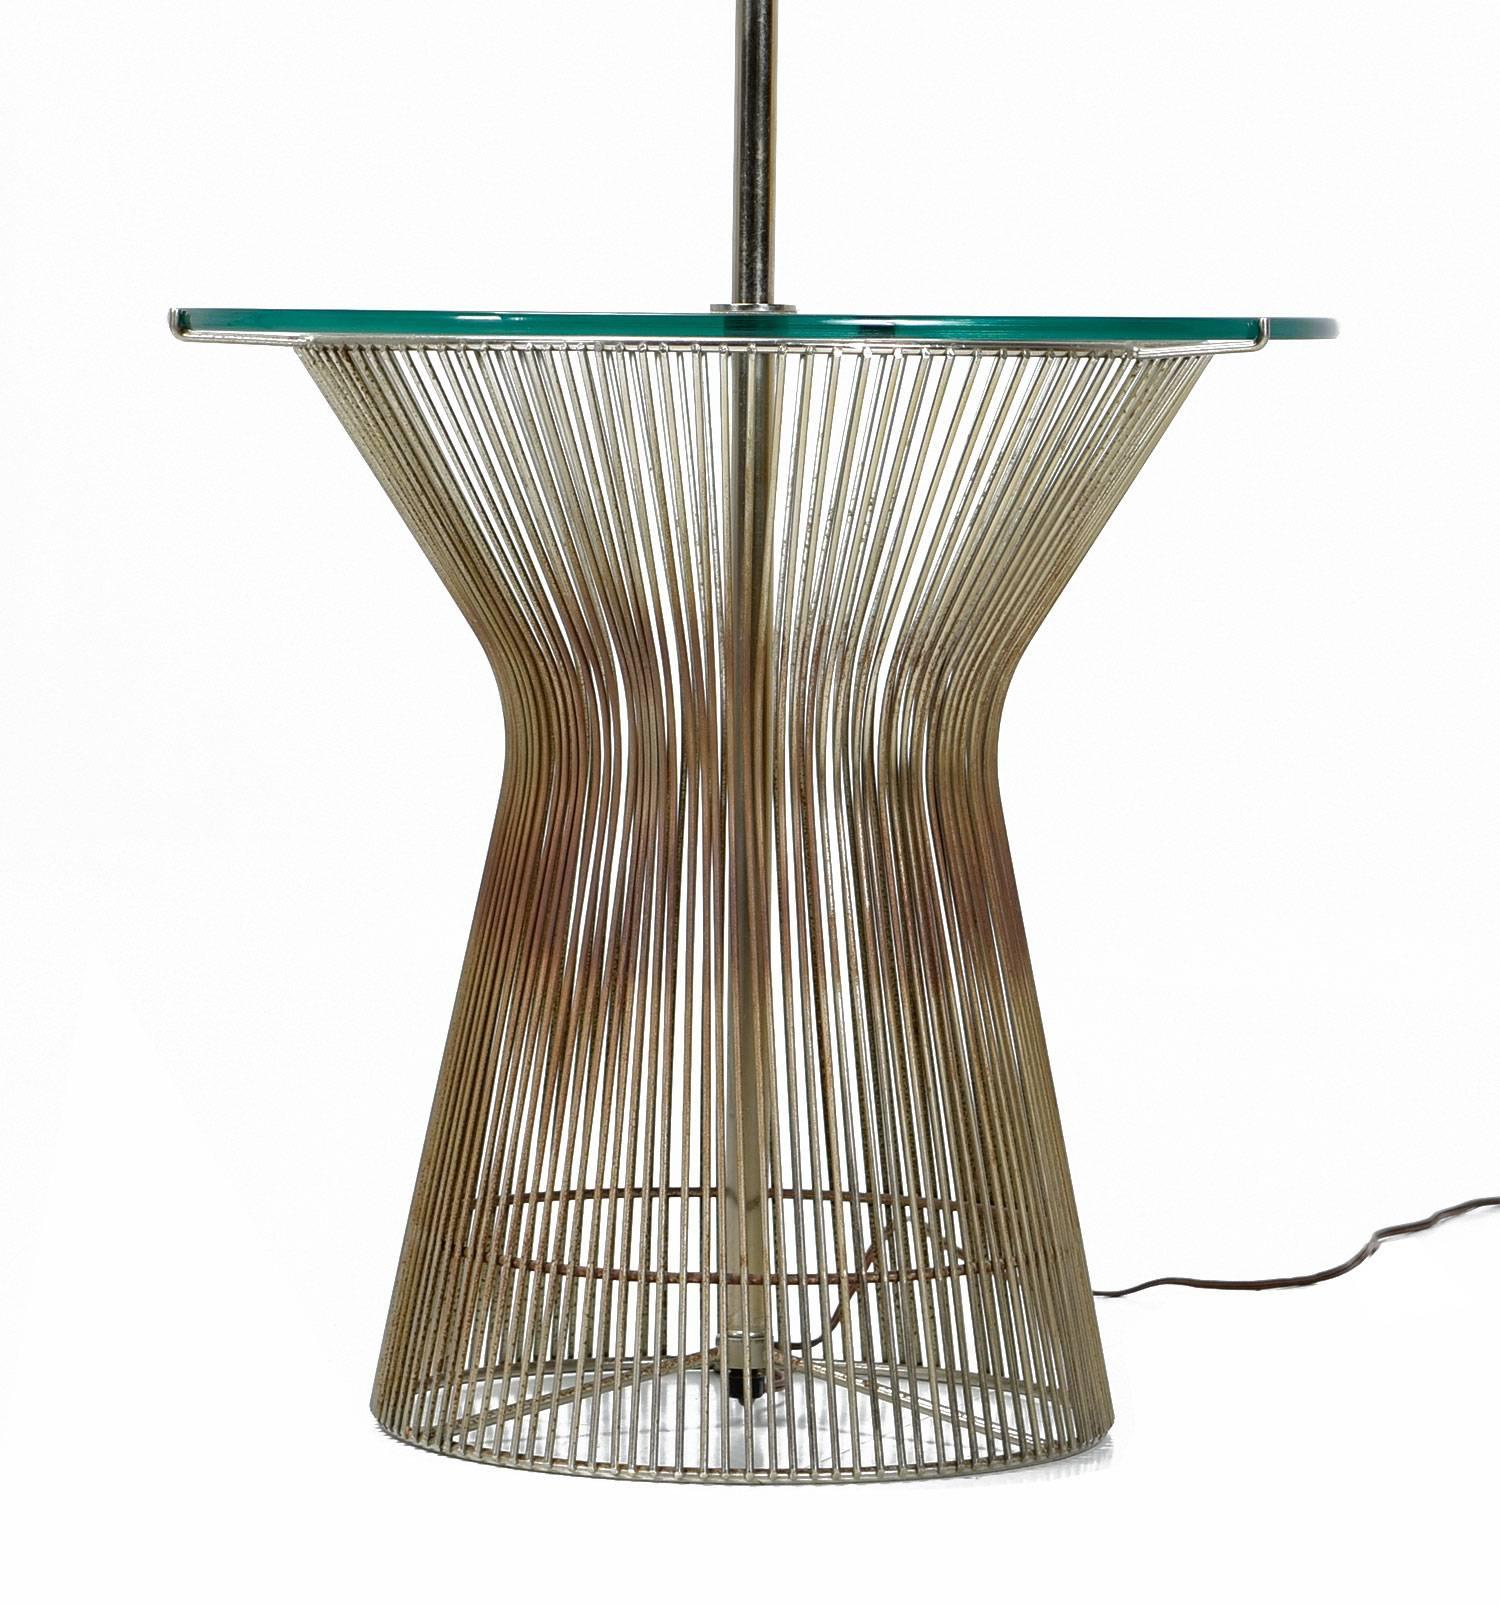 Vintage floor lamp influenced by the famous wire designs by Warren Platner for Knoll. This Mid-Century Modern lamp doubles as a table with the circular glass top. The lamp is outfitted with a contemporary drum lampshade.